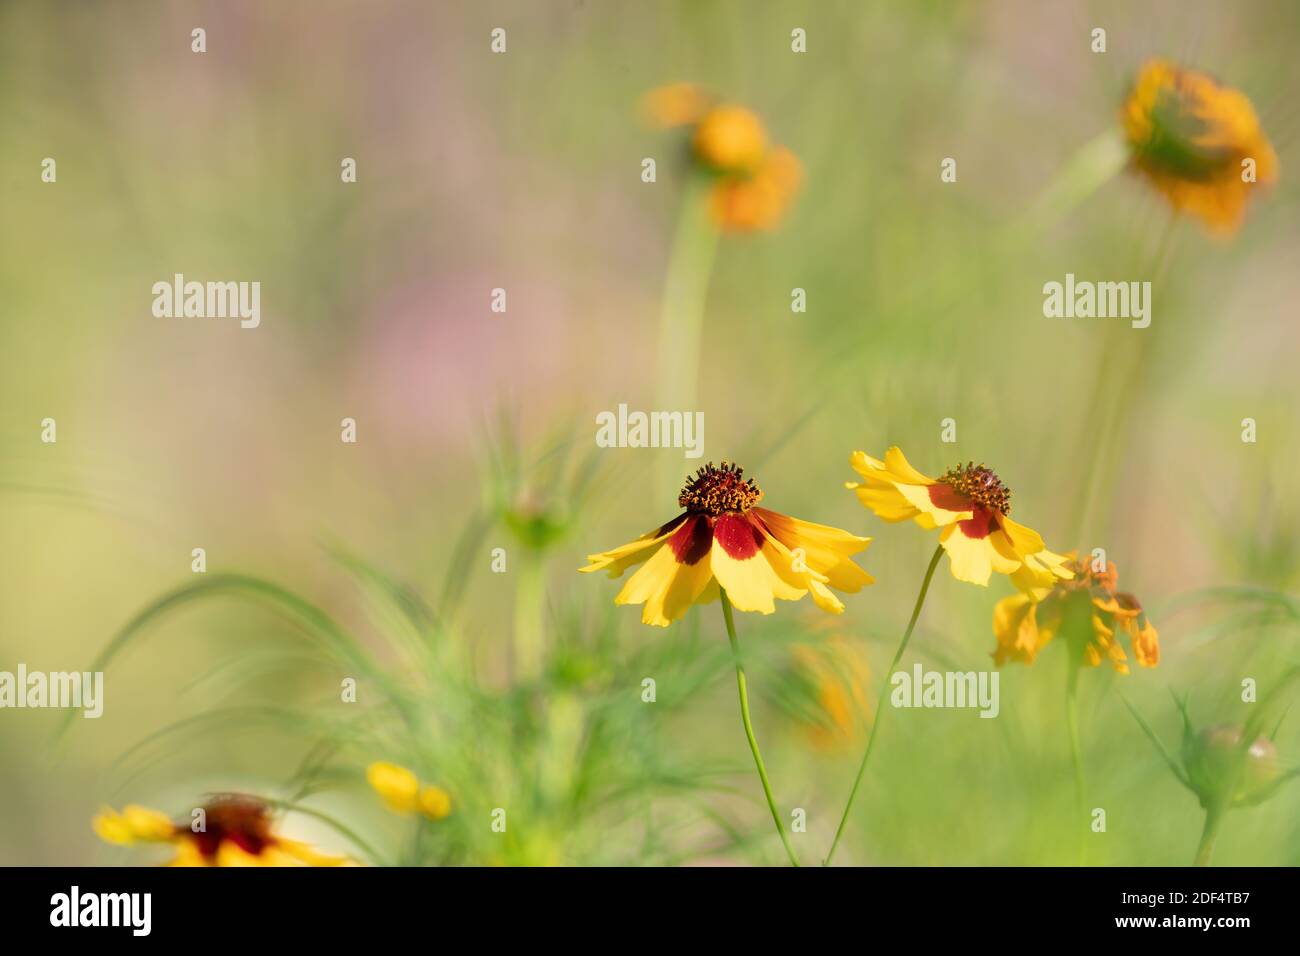 Yellow blooming flowers with brown hearts in a field. Sunflower, 'Goldrausch' Helenium autumnale. Selective focus. Stock Photo